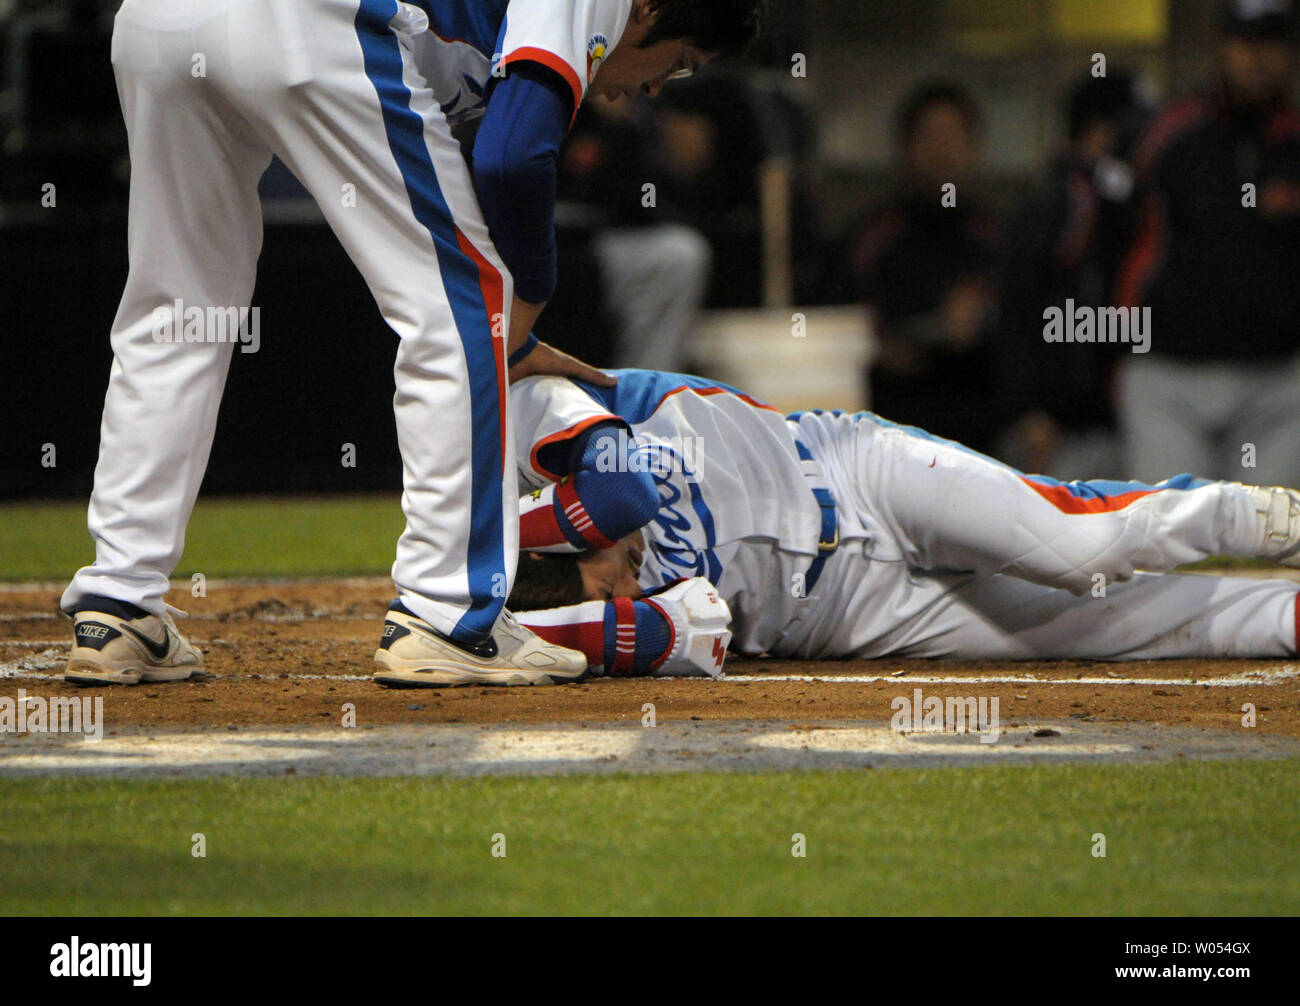 Lee Yong-Kyu of Team Korea holds his head after being hit by a pitch during the third inning against Team Japan during Round 2 of the World Baseball Classic in San Diego, March 19, 2009.  ( UPI Photo/Earl S. Cryer) Stock Photo